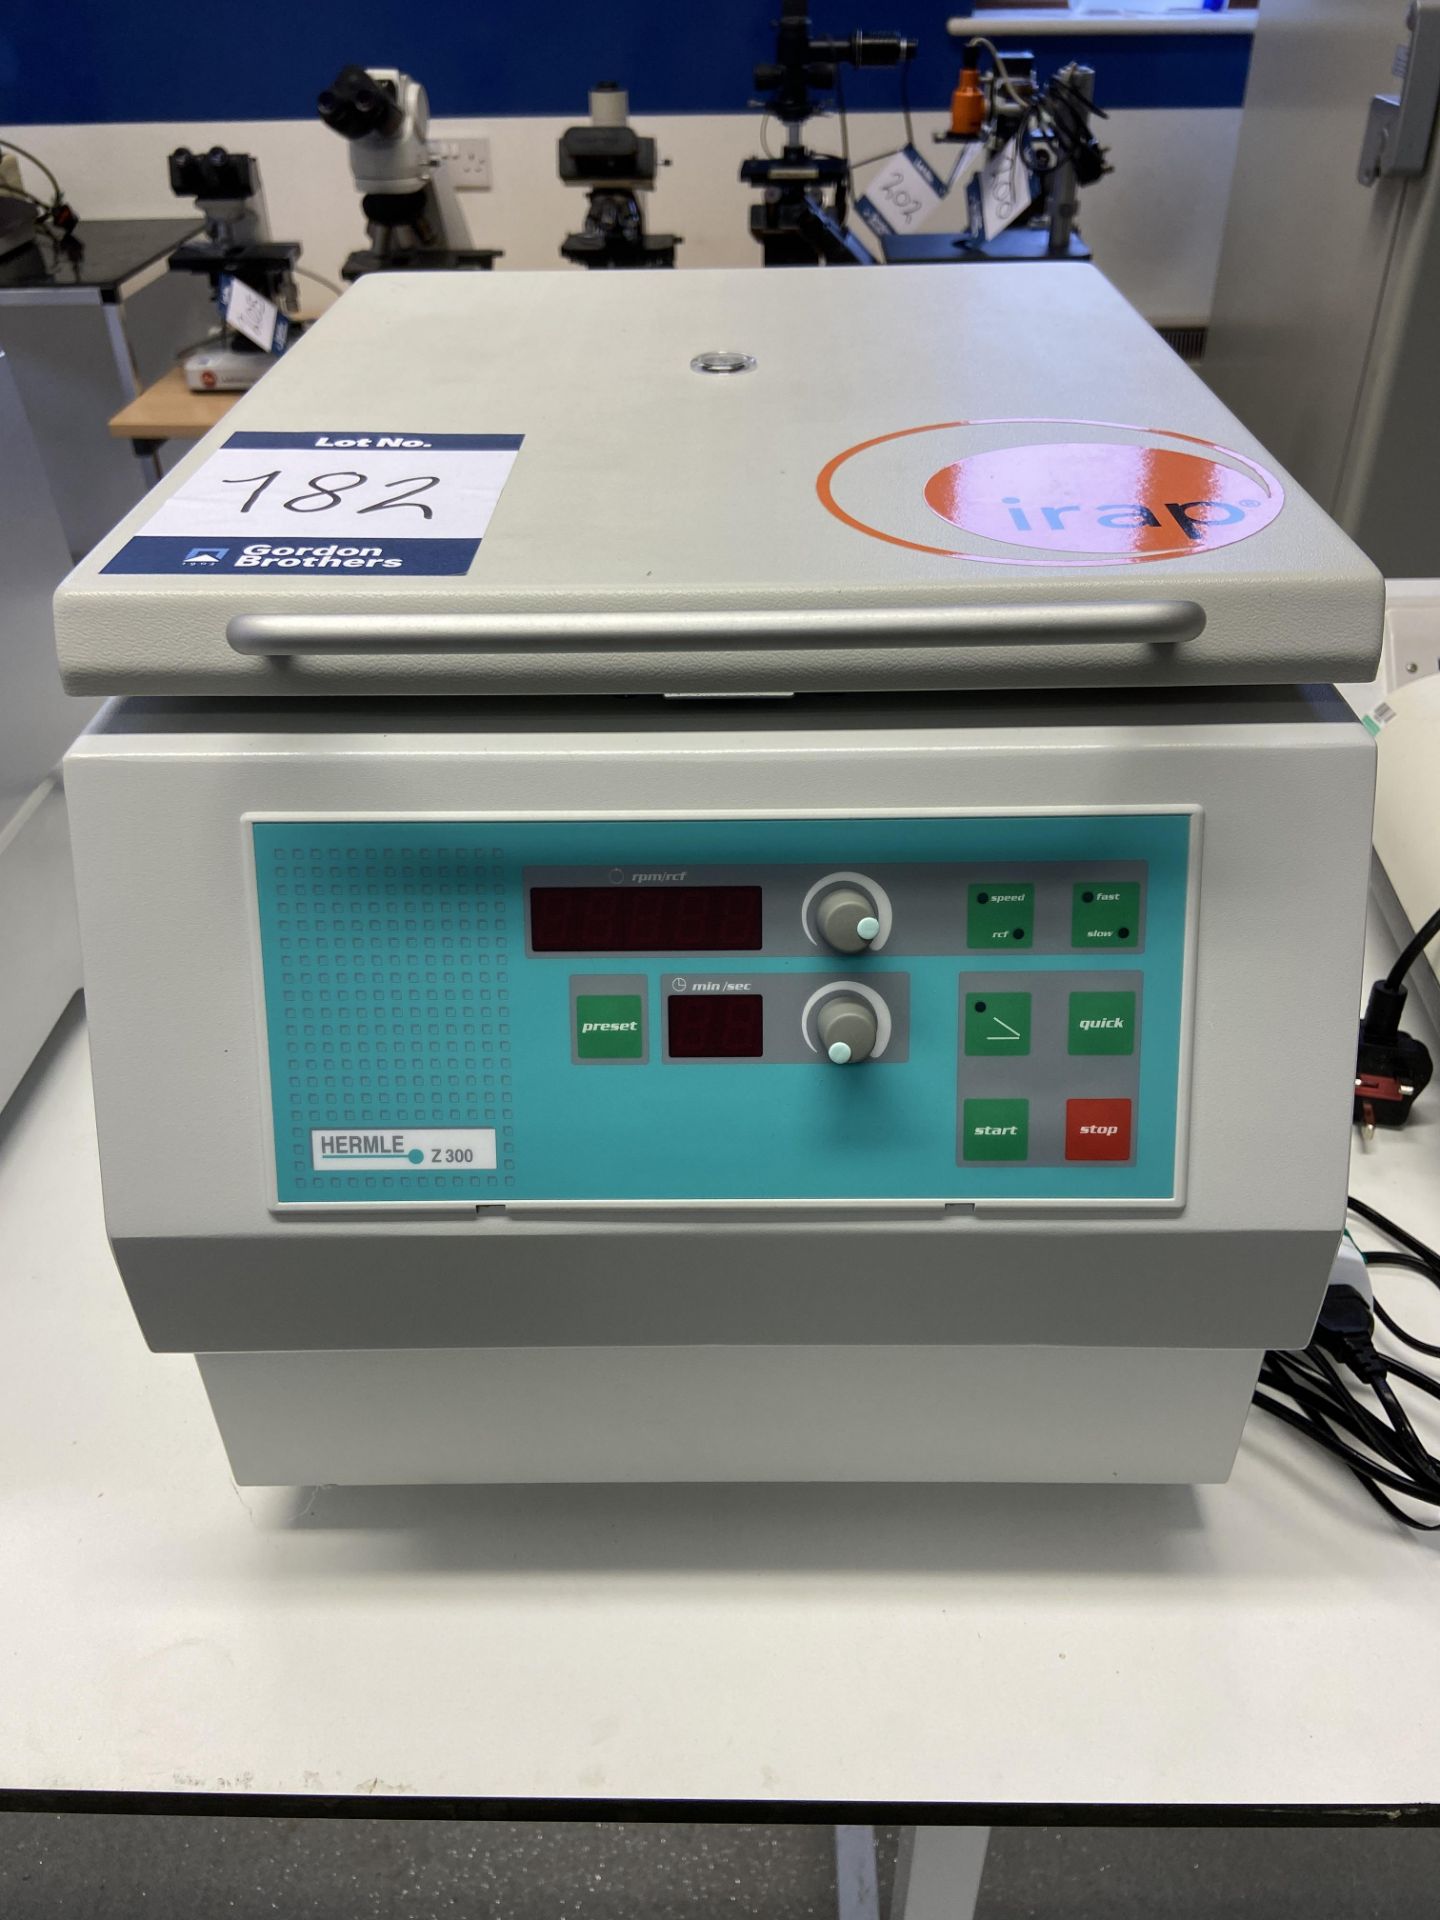 Hermle Z 300 Ortho benchtop centrifuge, Serial No. 47108020 (2010), with 240v power cable